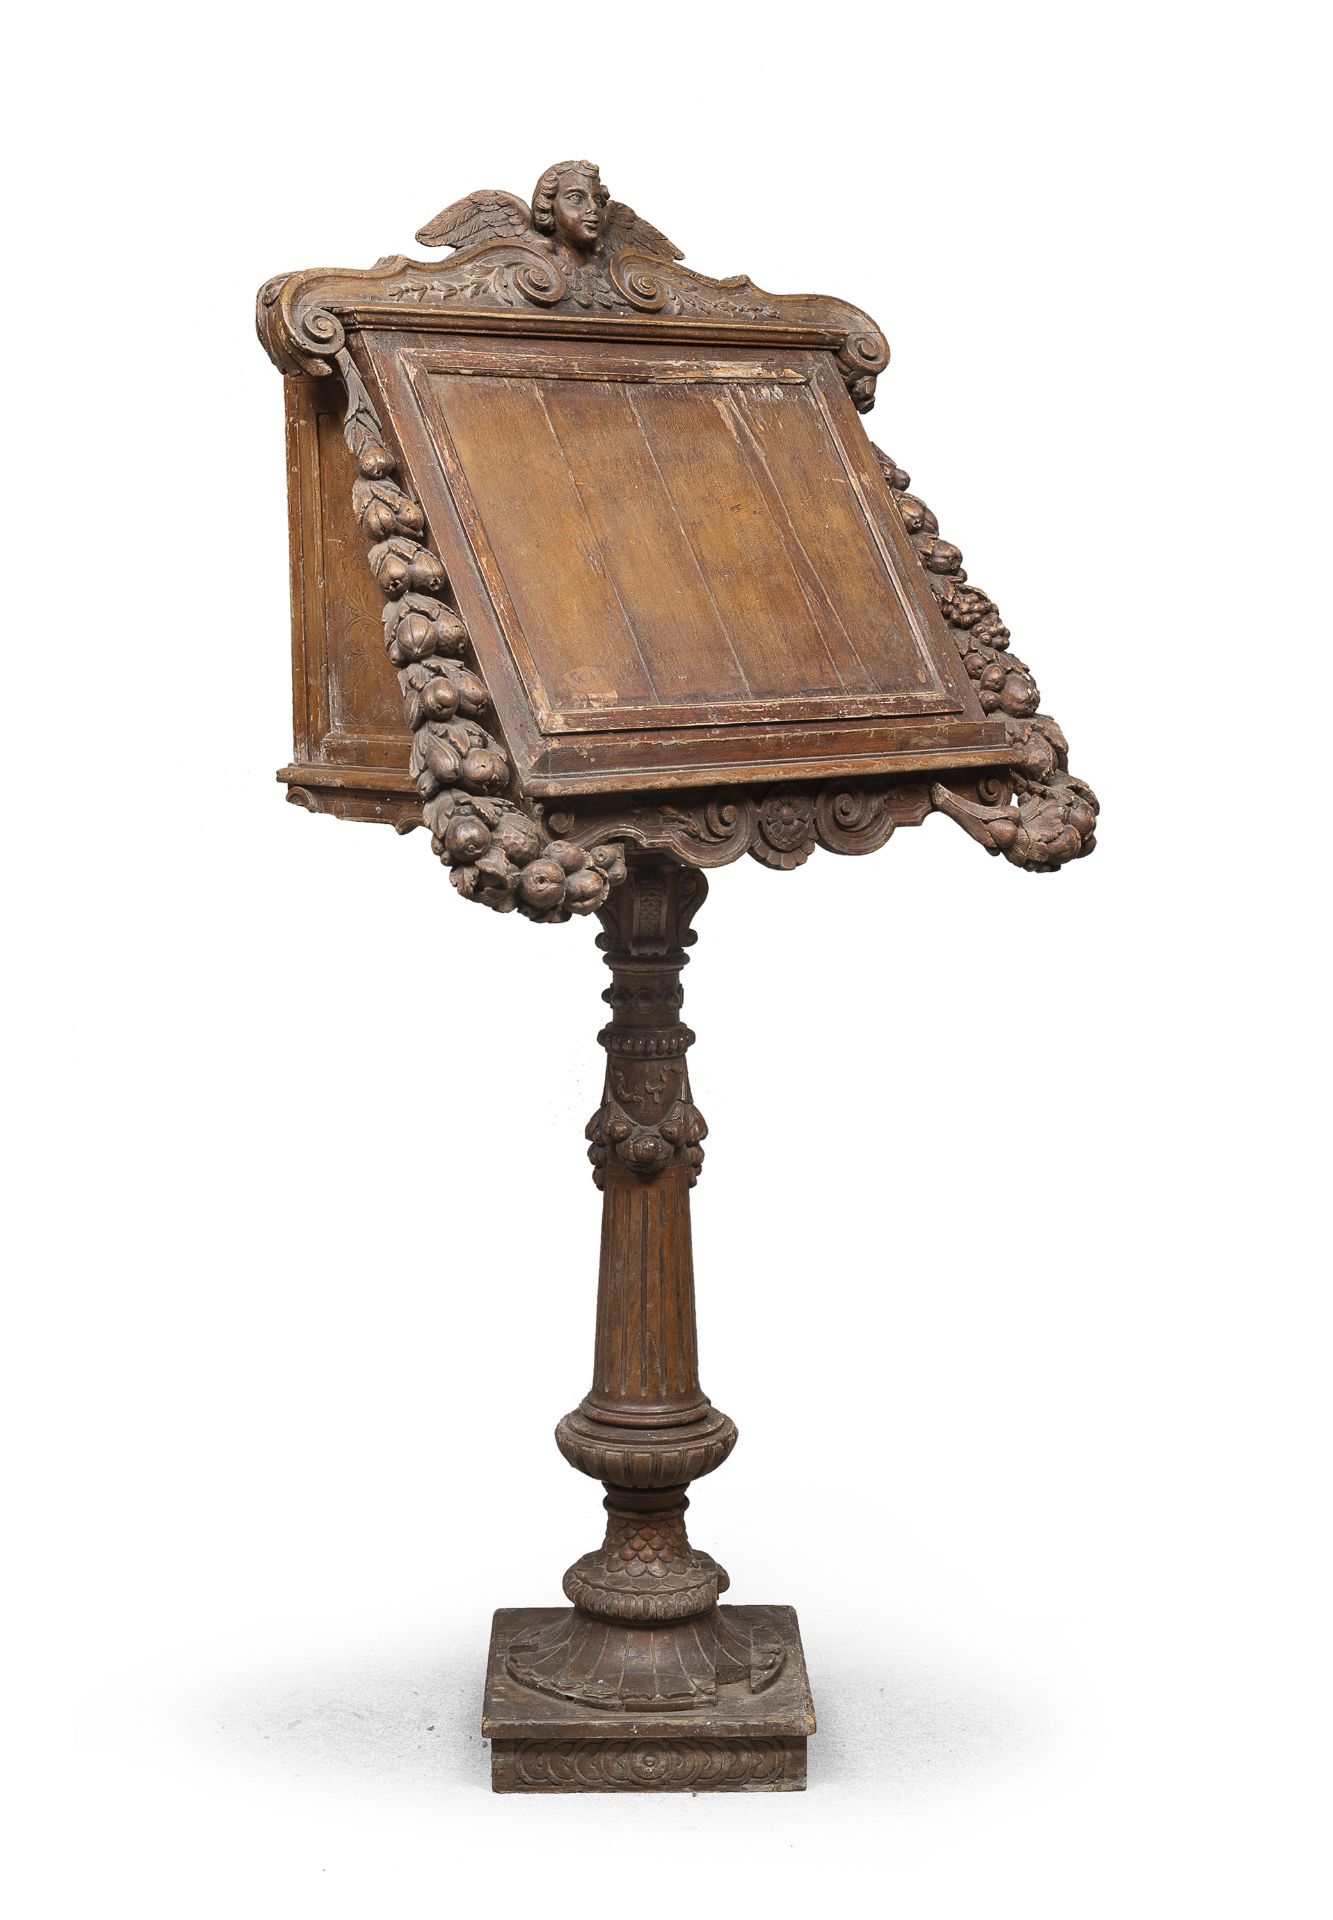 WALNUT BOOK REST CENTRAL ITALY 17TH CENTURY